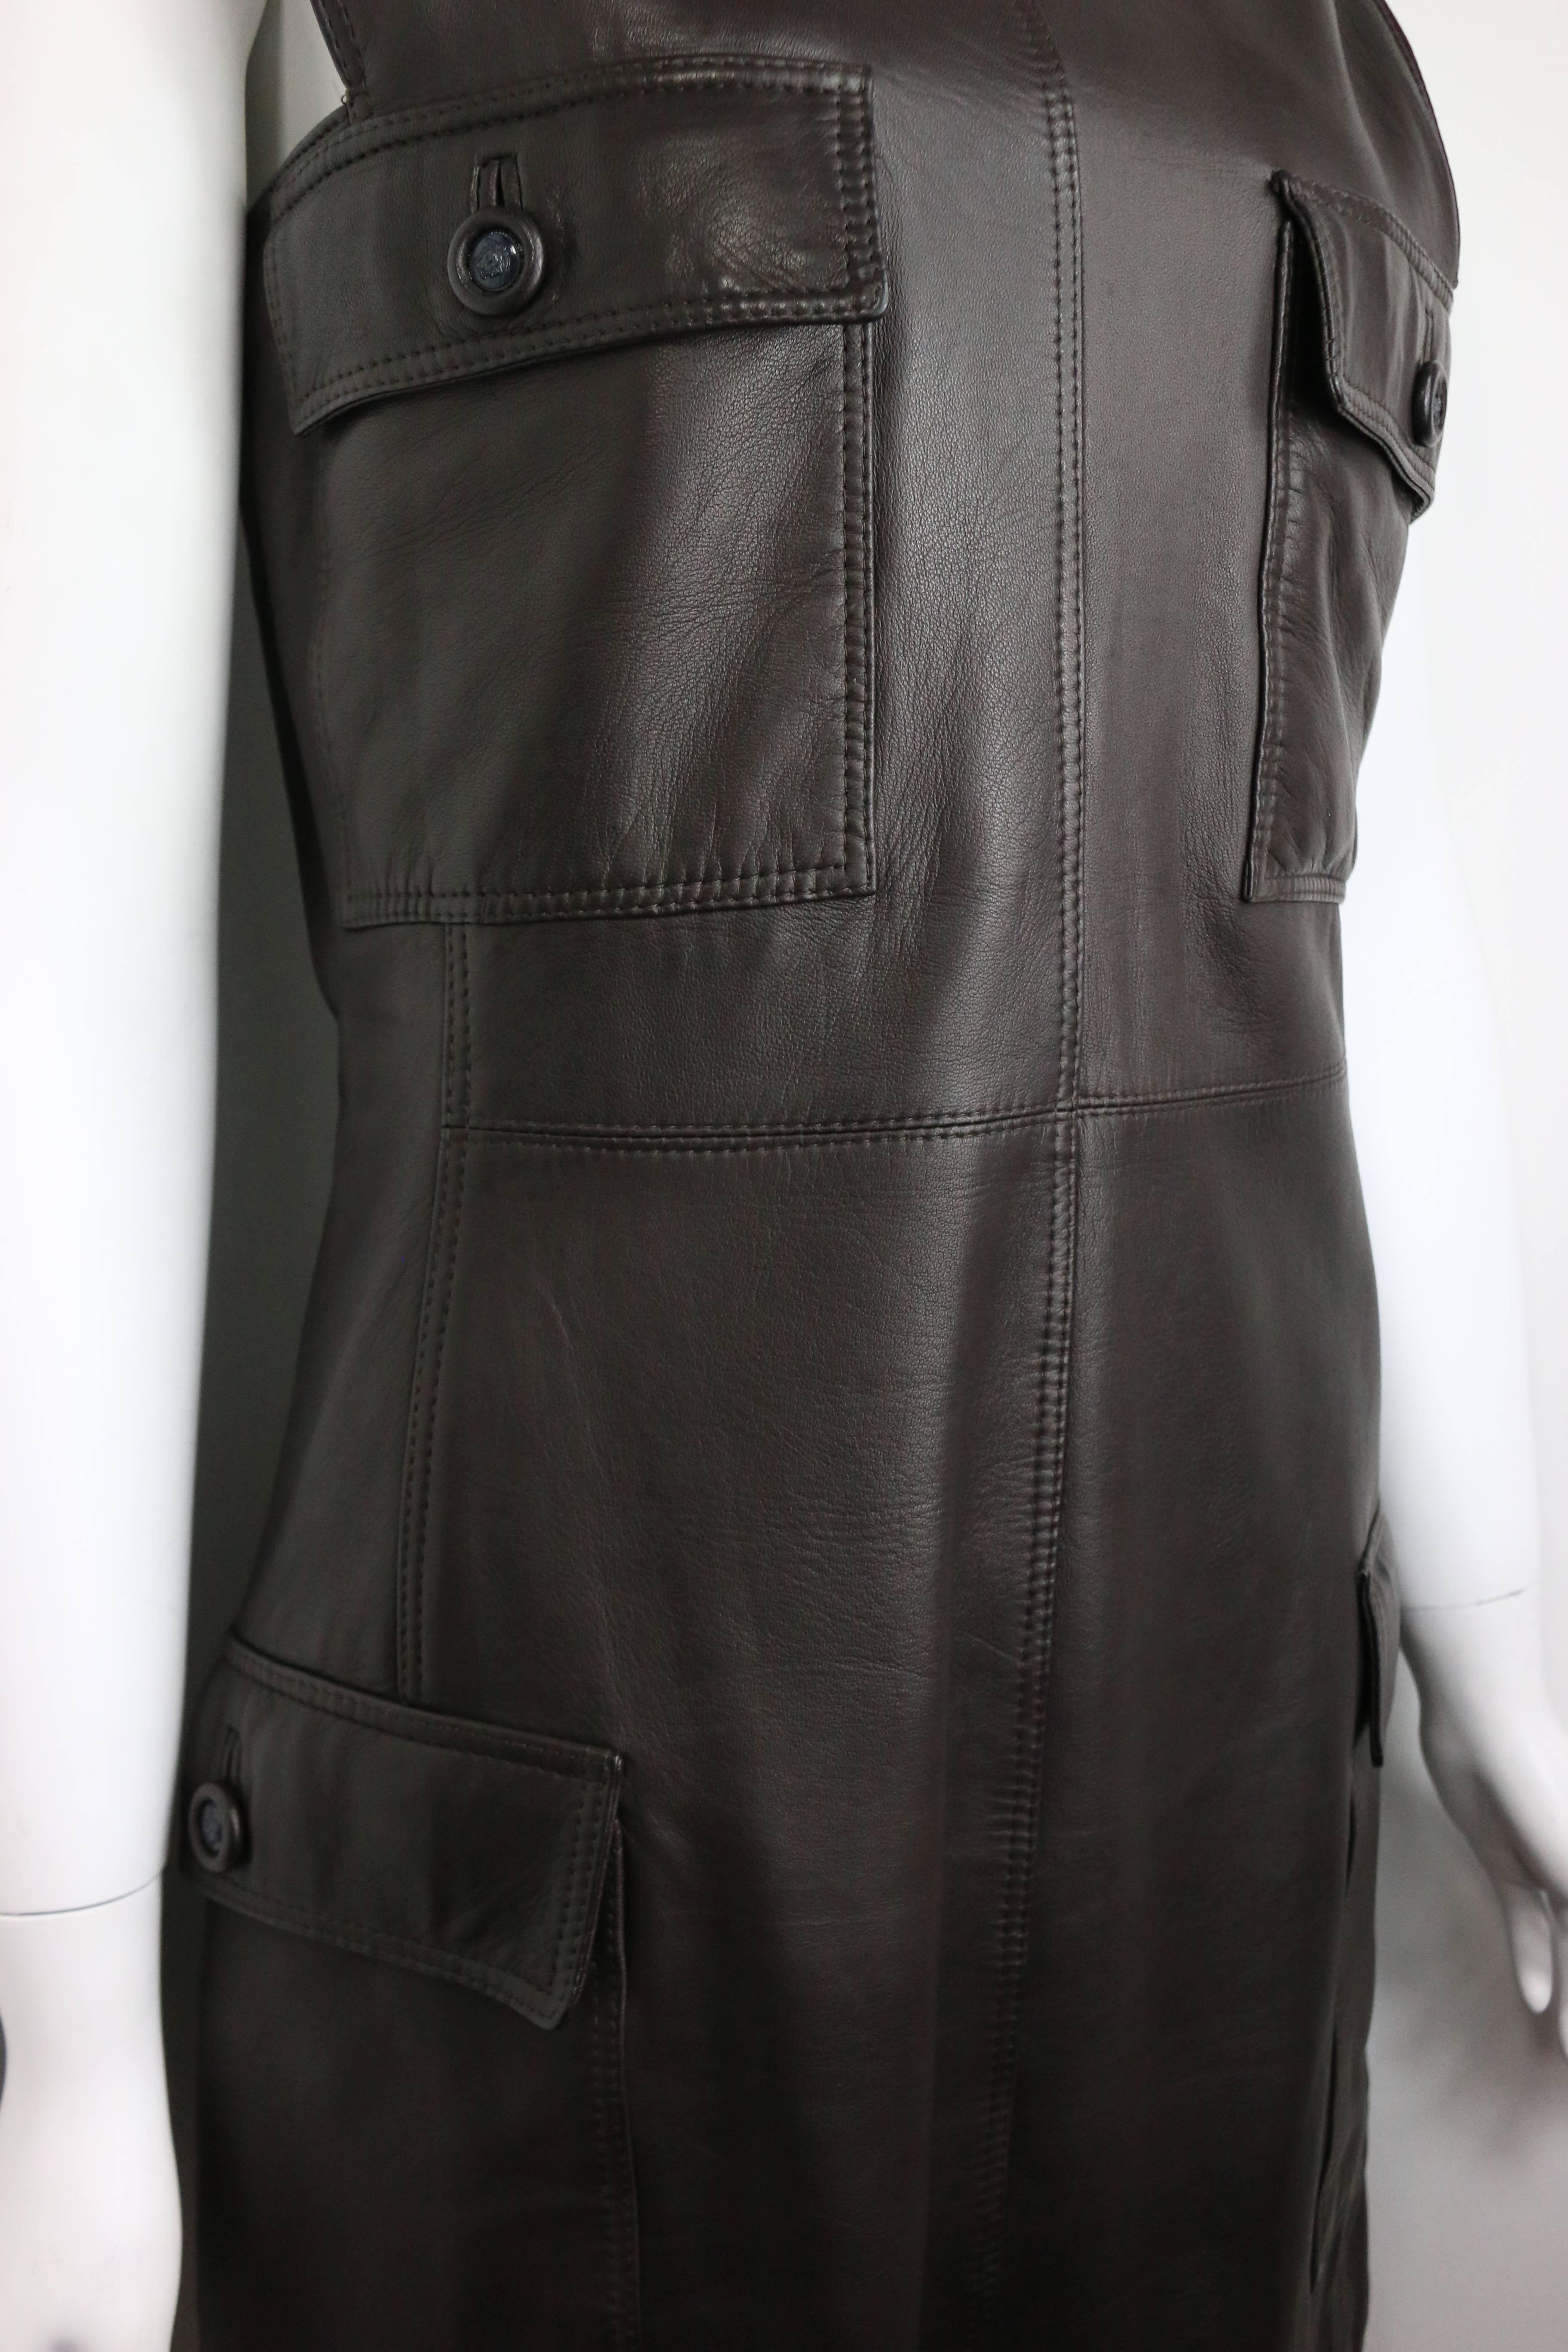 - Vintage iconic 90s Gianni Versace brown leather dress. 

- Featuring four pockets with signature medusa buttons. 

- Back zipper closure. 

- Made in Italy. 

- Size 40. 

- Length: 33 inches. Bust: 32 inches. Waist: 30inches. 

- 100% Leather.